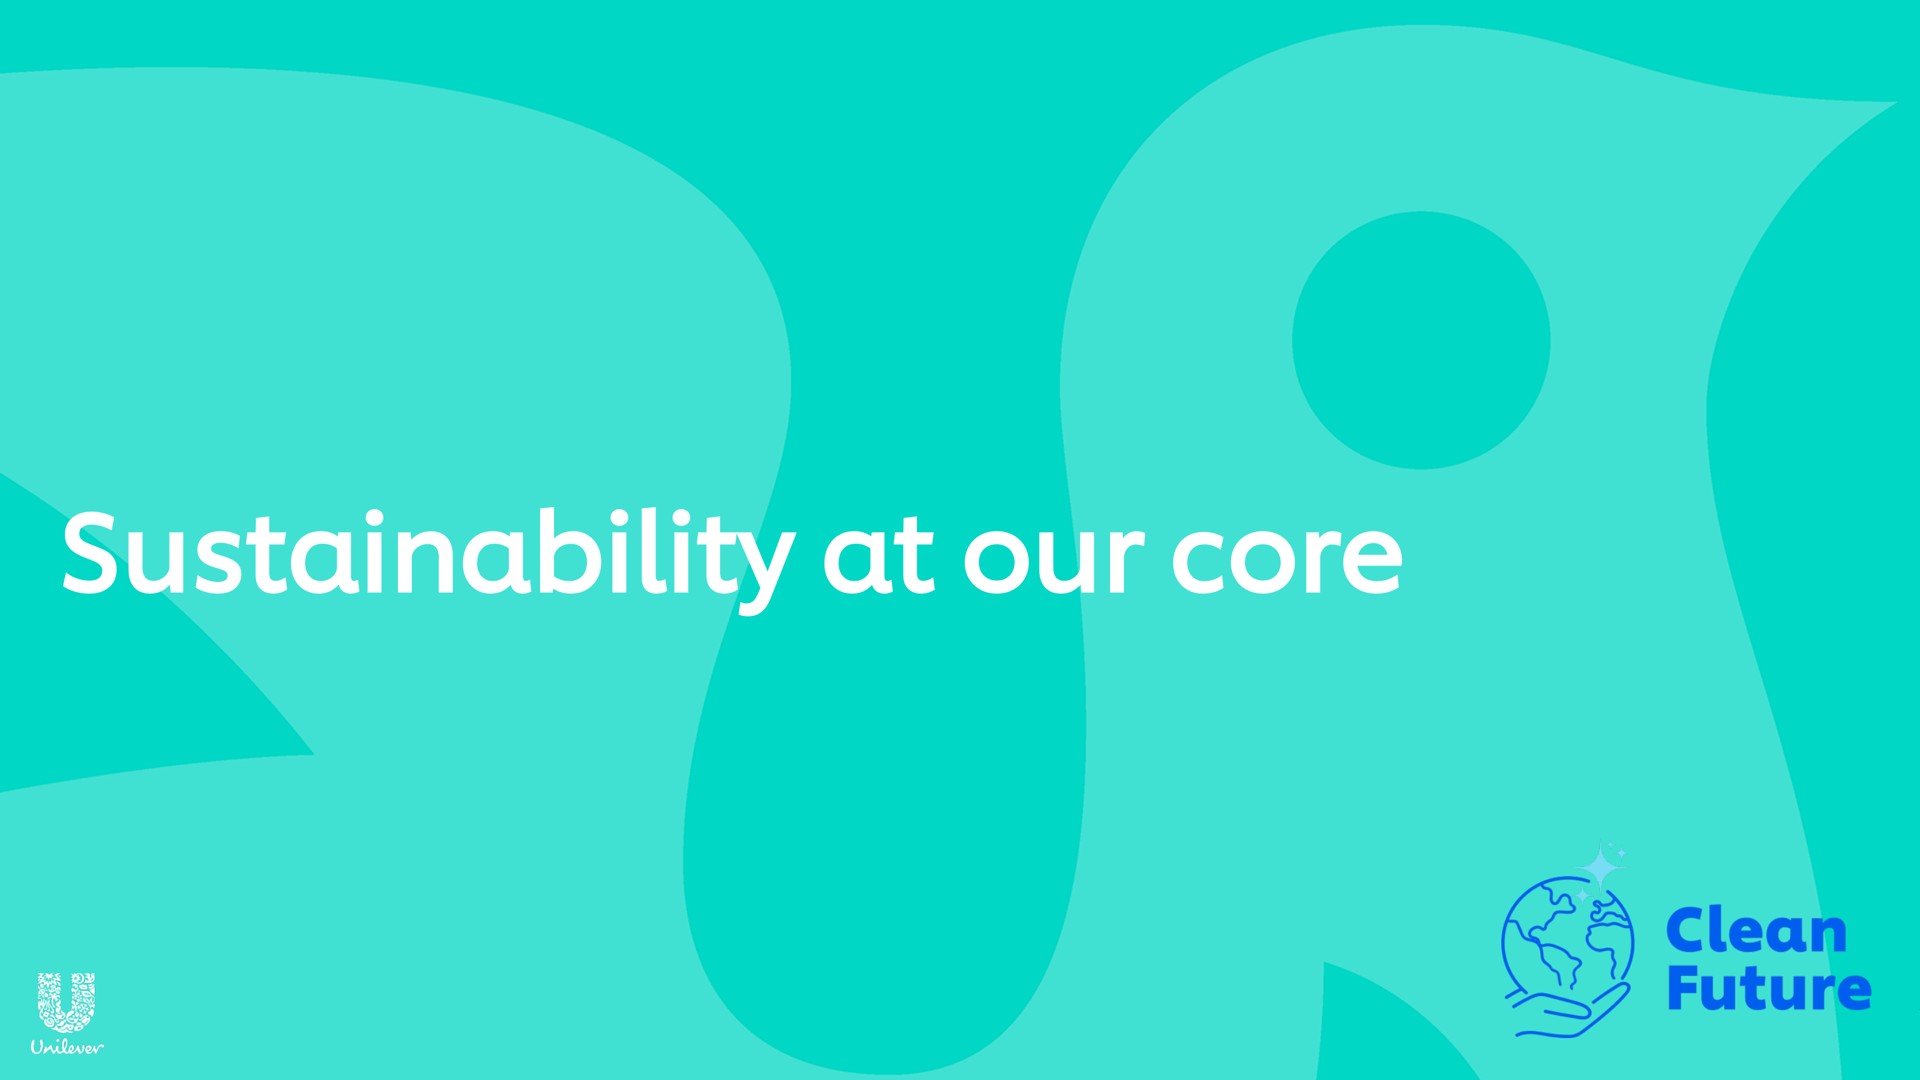 at our core | Unilever